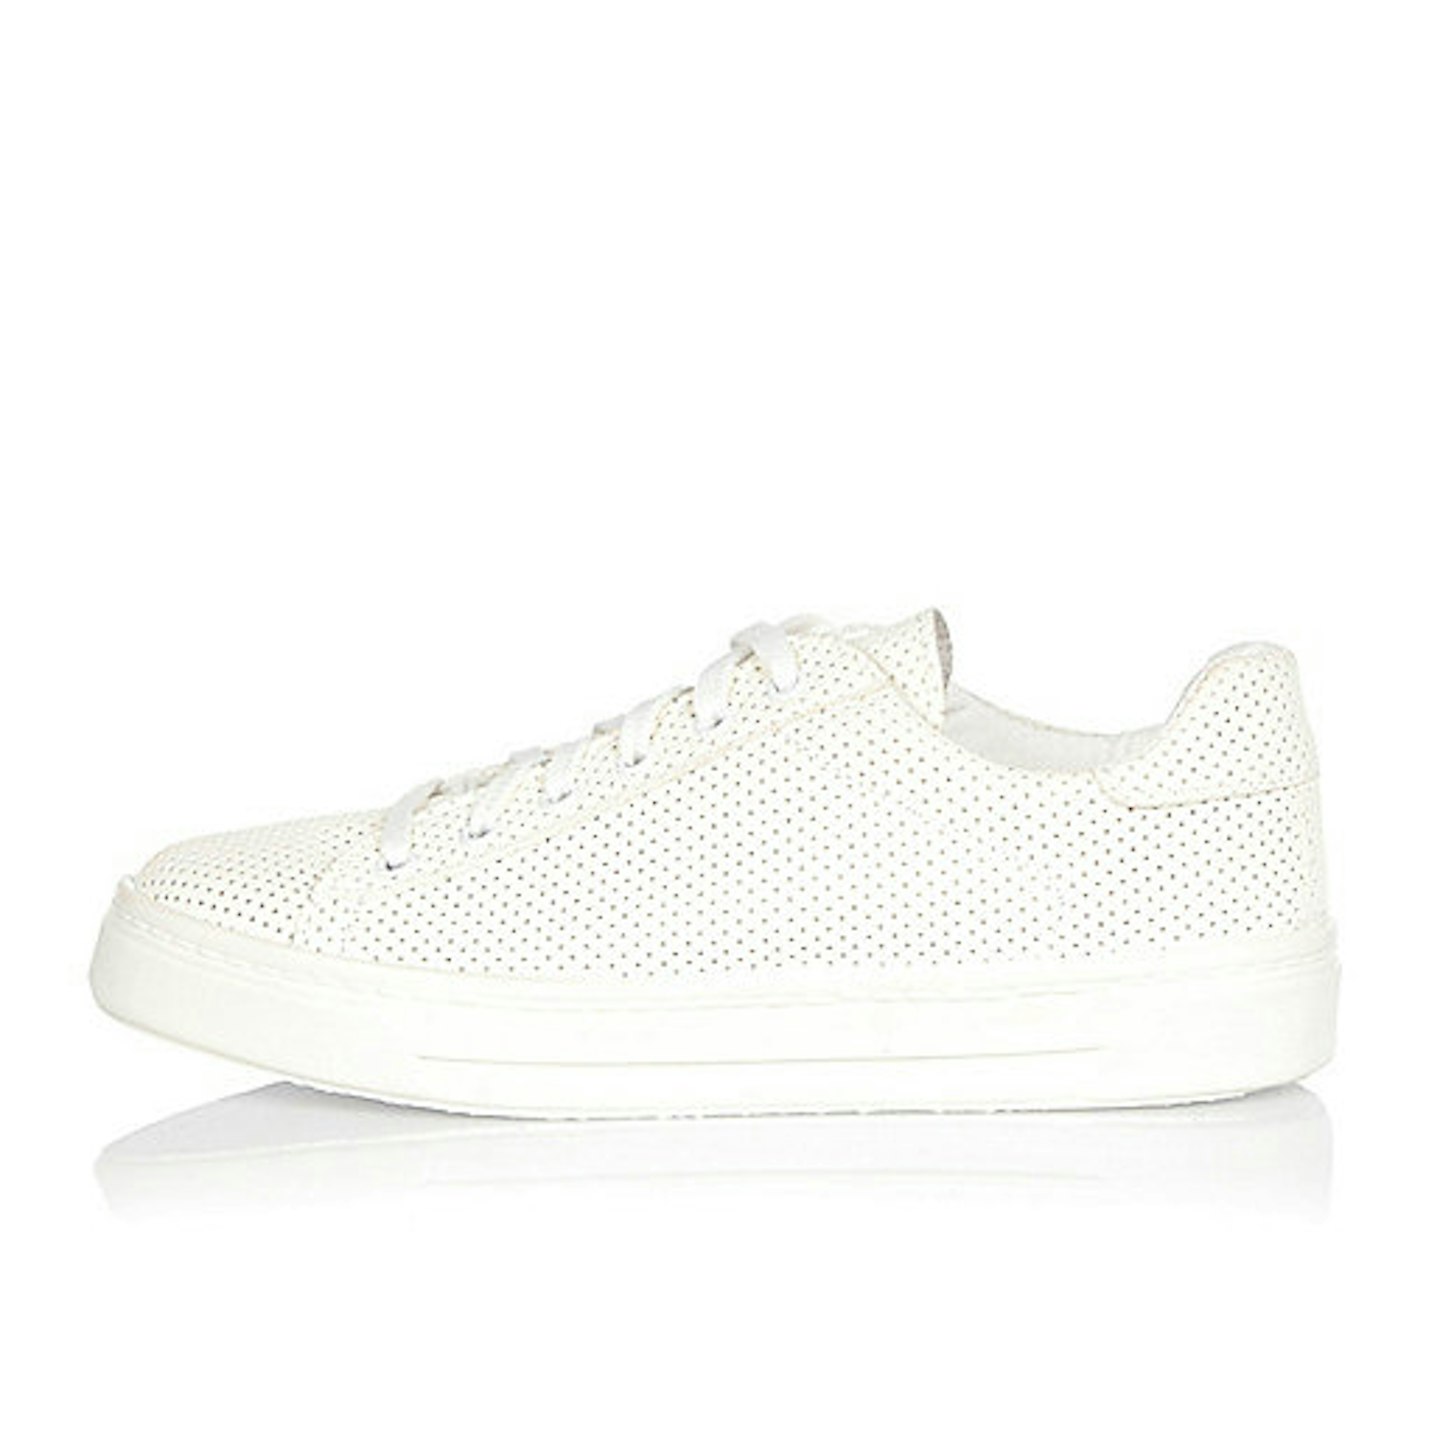 White Perforated Lace-Up Plimsolls, £24